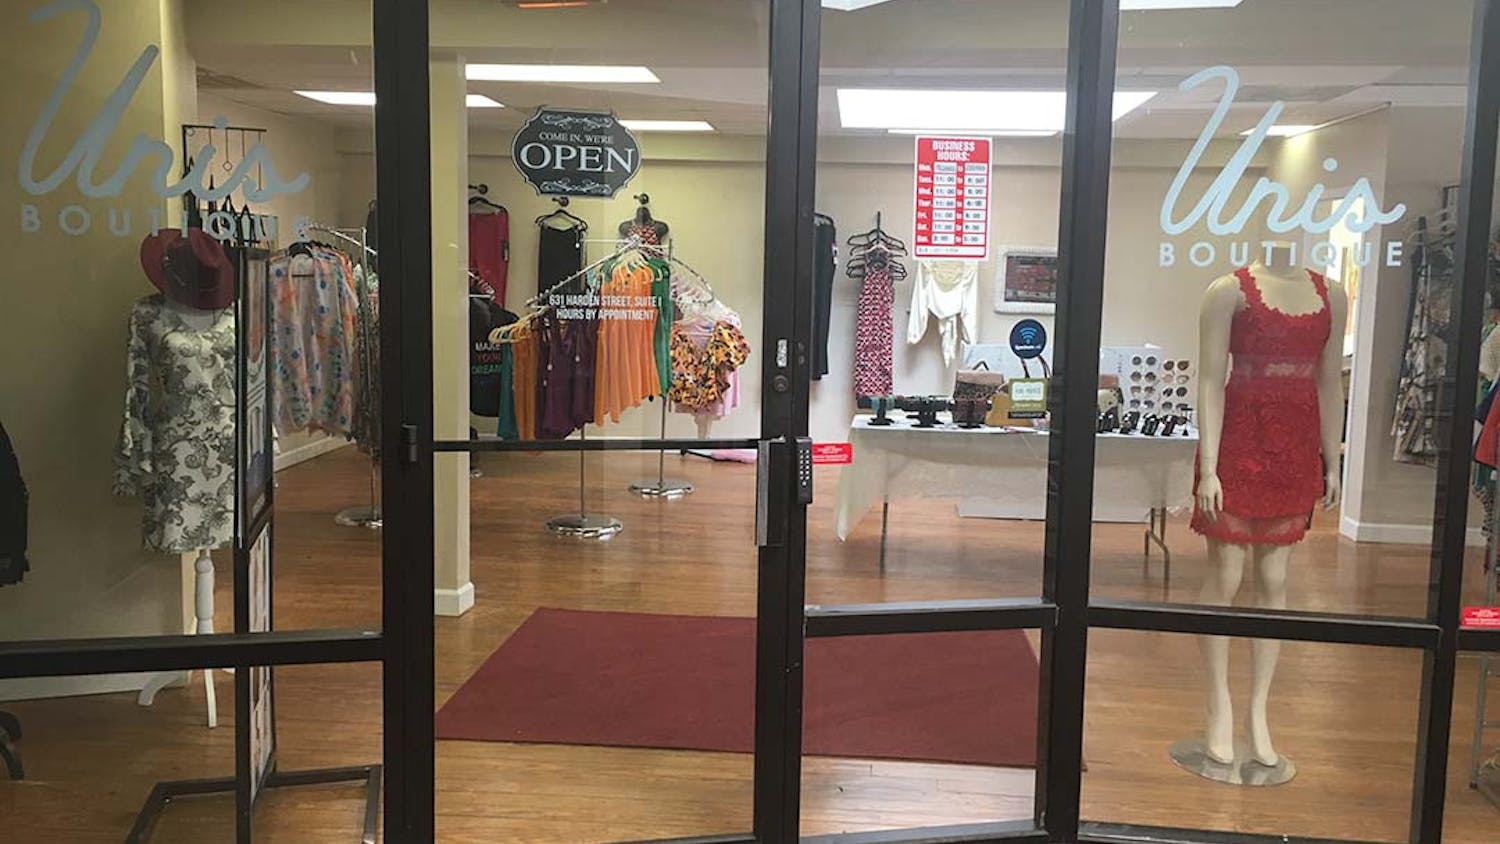 Unis Boutique offers a wide selection of clothing and accessories. It is located on 631 Harden St in Columbia, SC.